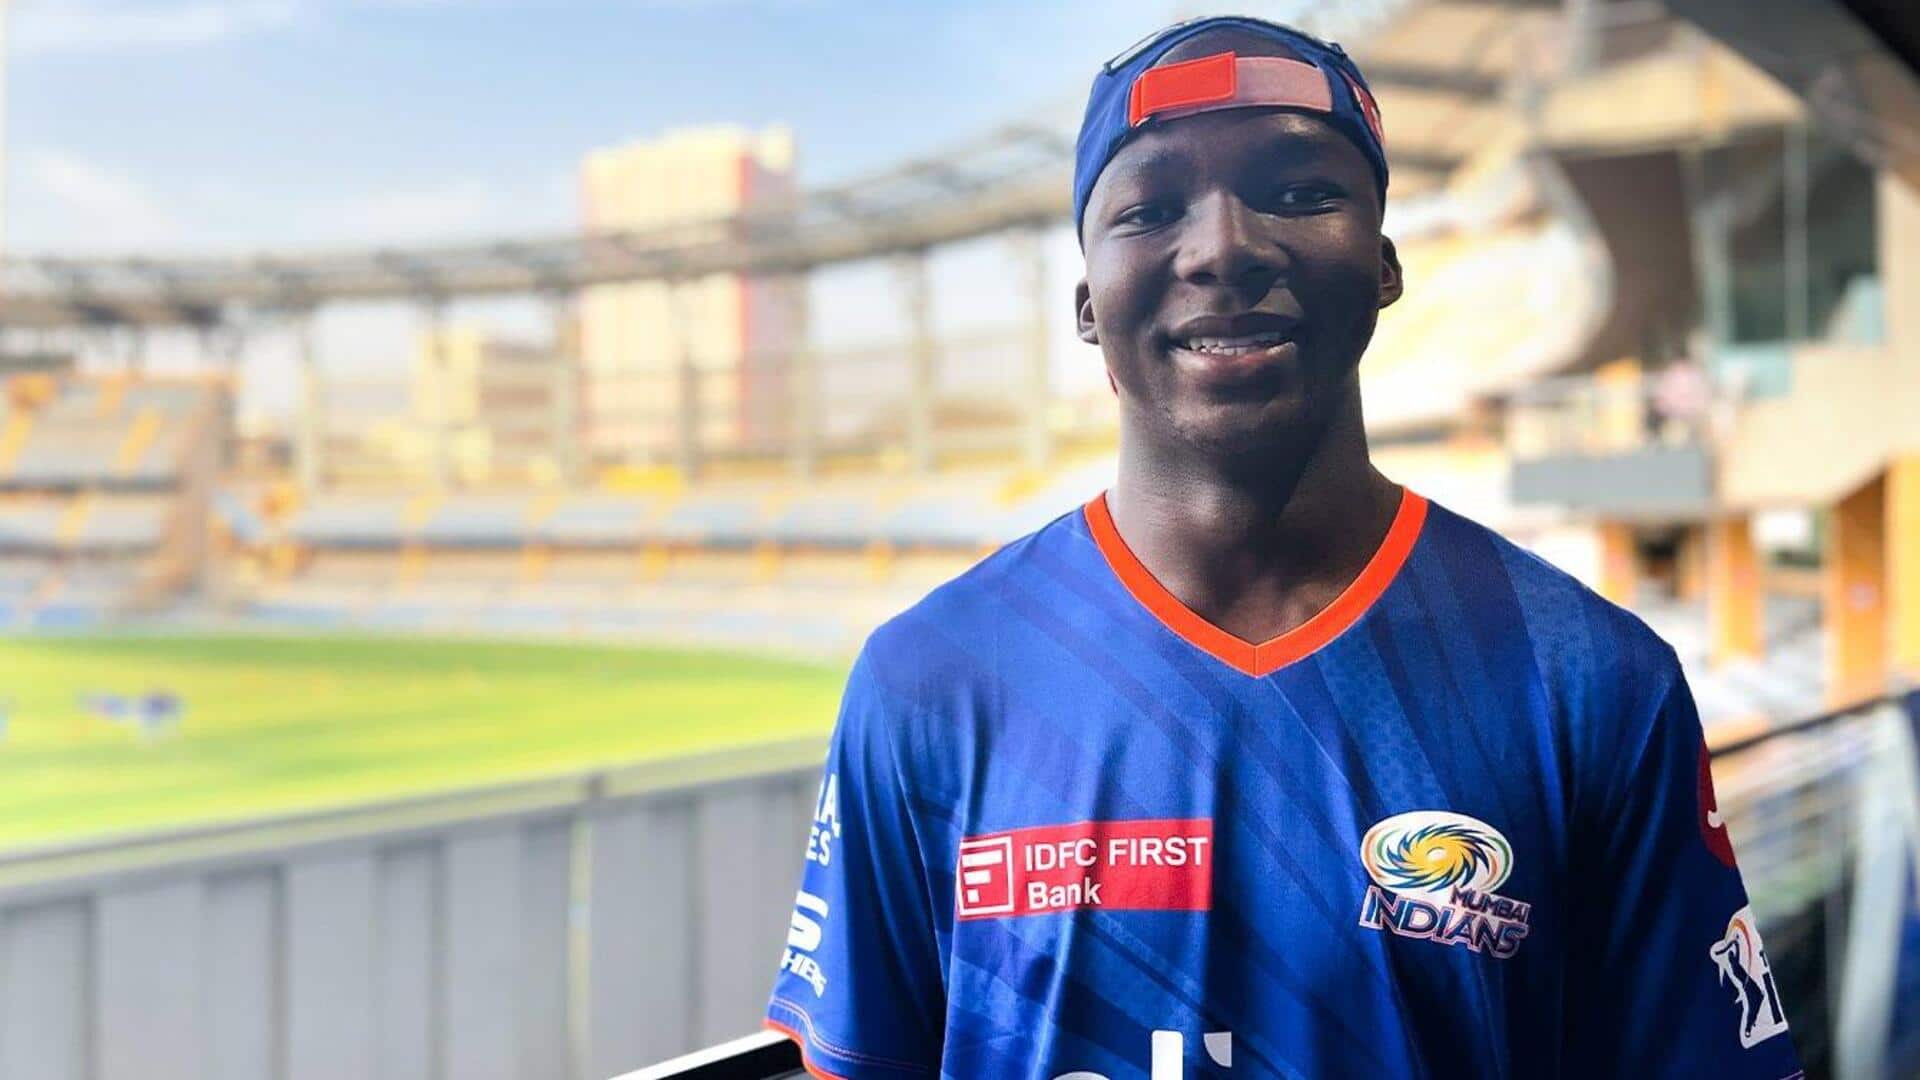 MI's Kwena Maphaka scripts an unwanted record in IPL: Details